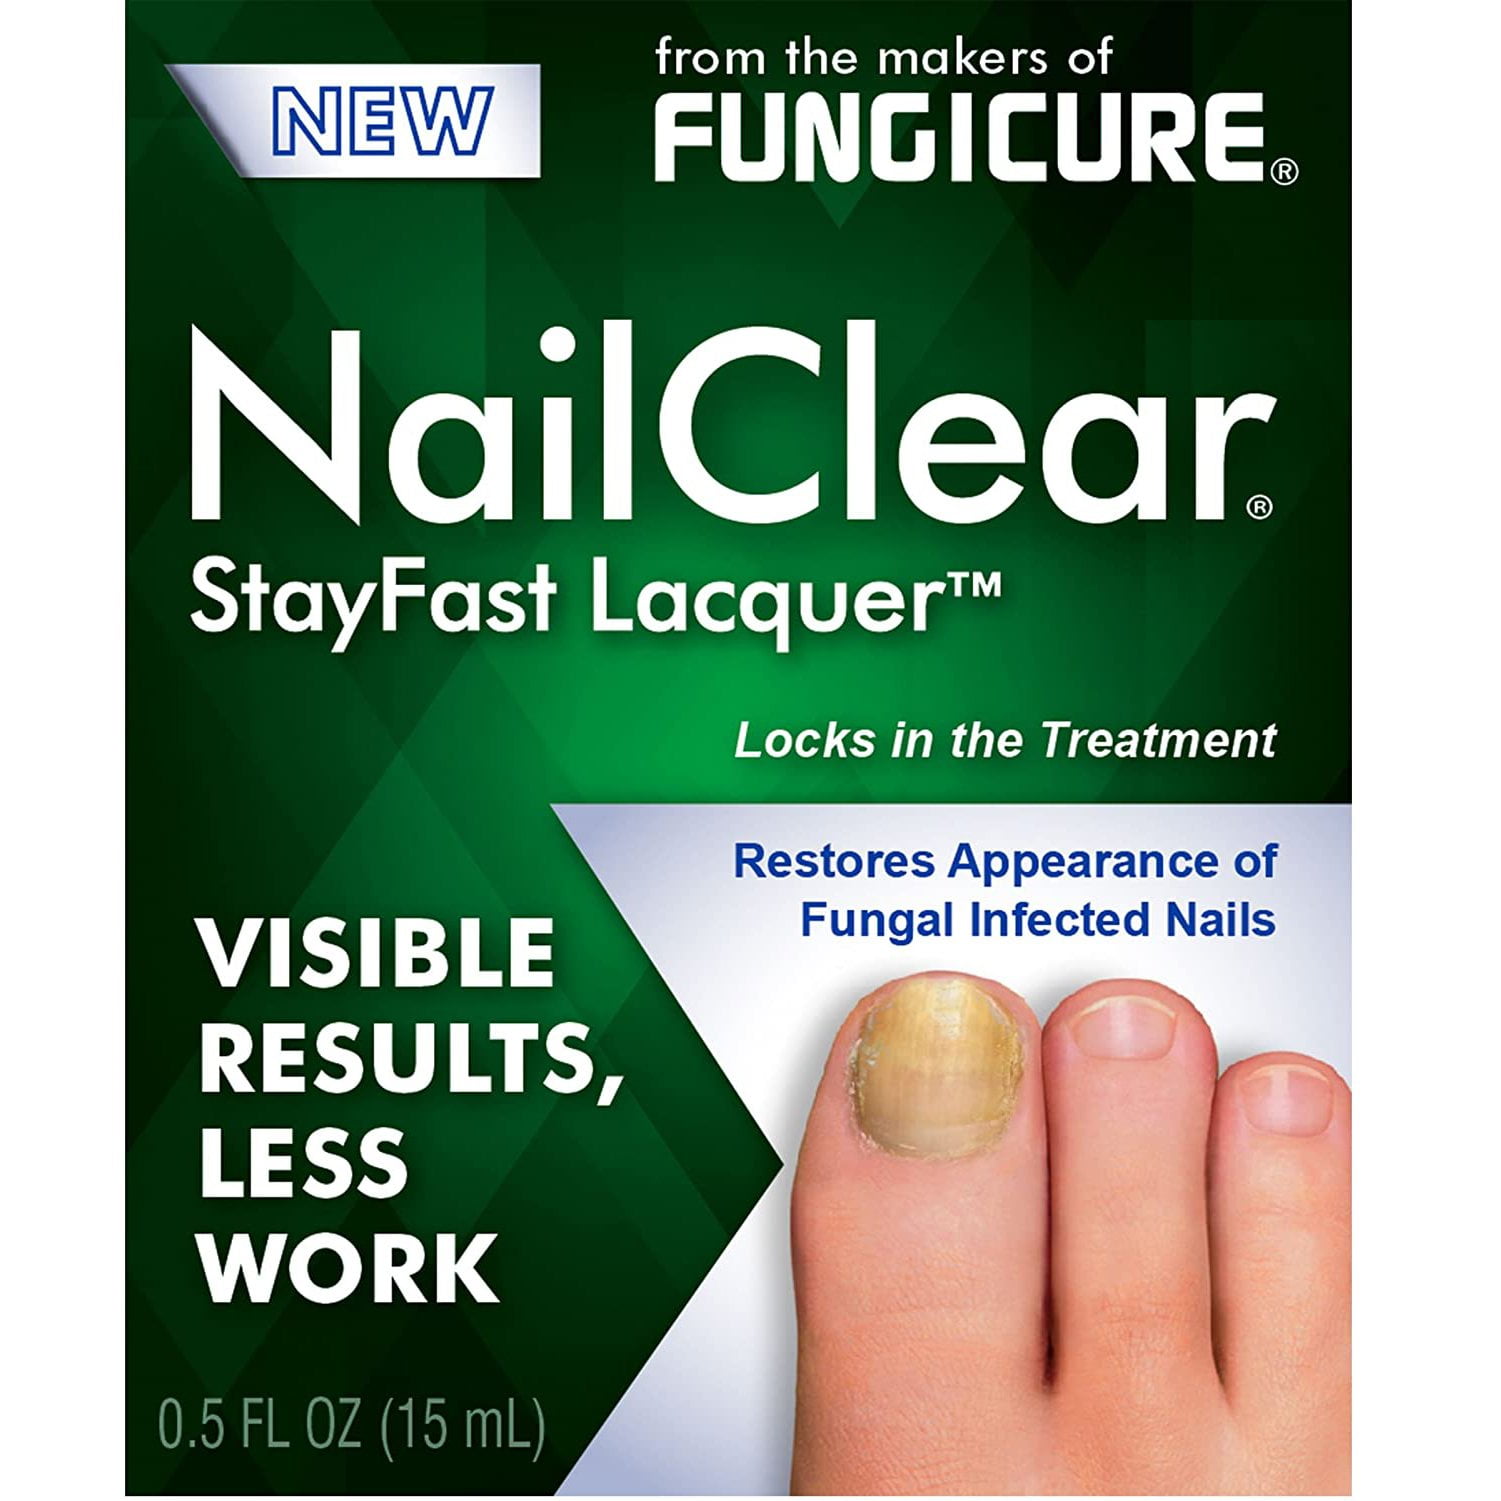 Fungicure Liquid Nail Clear Stay Fast Lacquer Fungi Cure 0 5oz 6123f976 026a 4361 a625 194a198cf716.7c07fad5c7fb1e96042ee924a4890be8